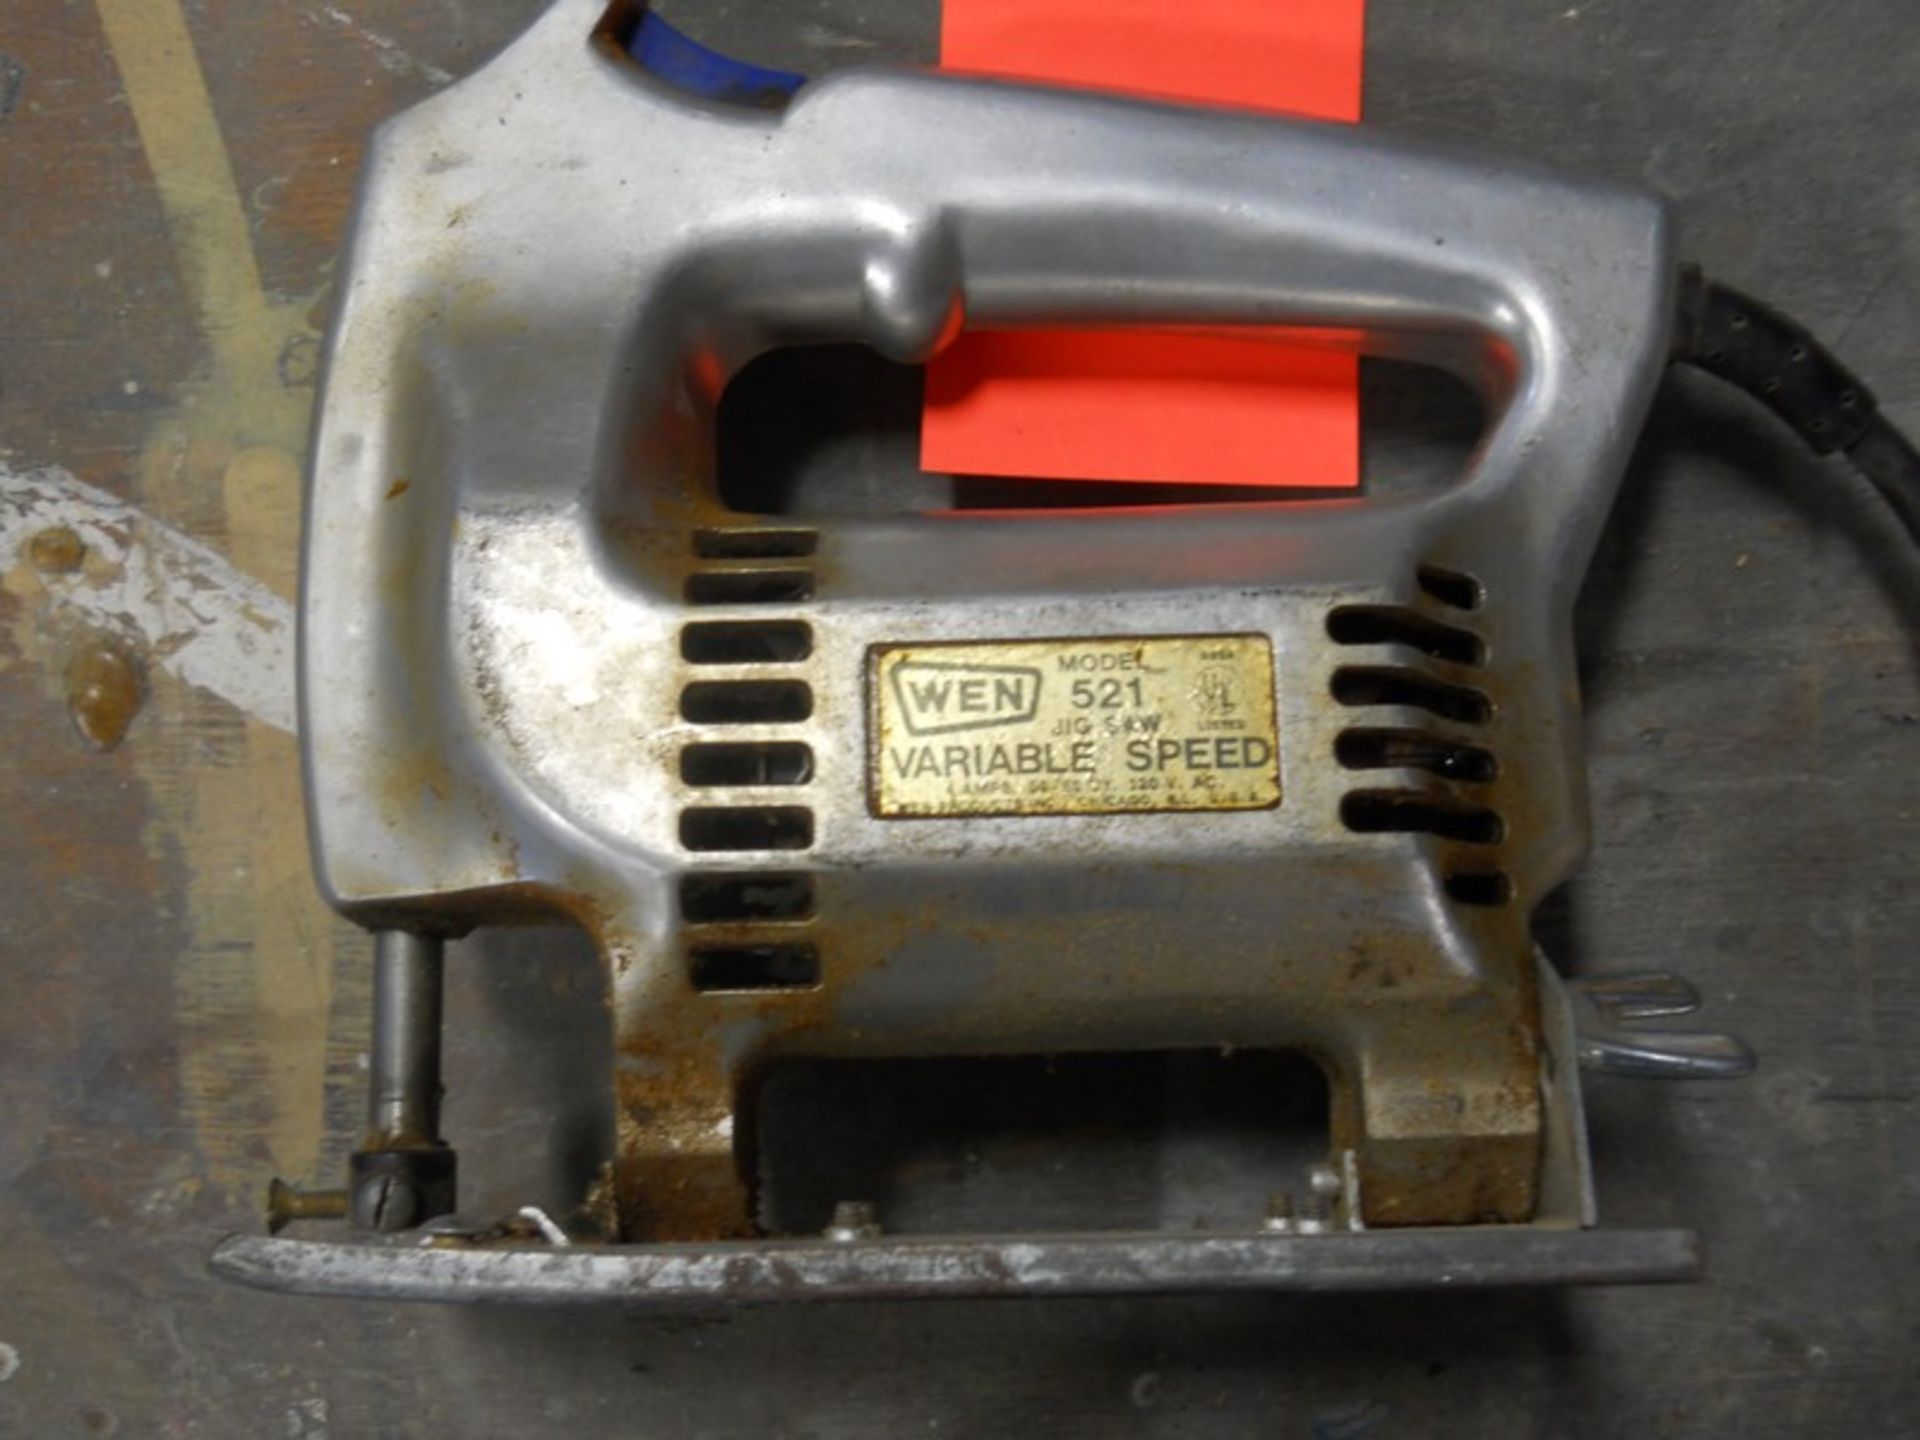 Wen Model 521 Variable Speed Electric Jigsaw - Image 2 of 4